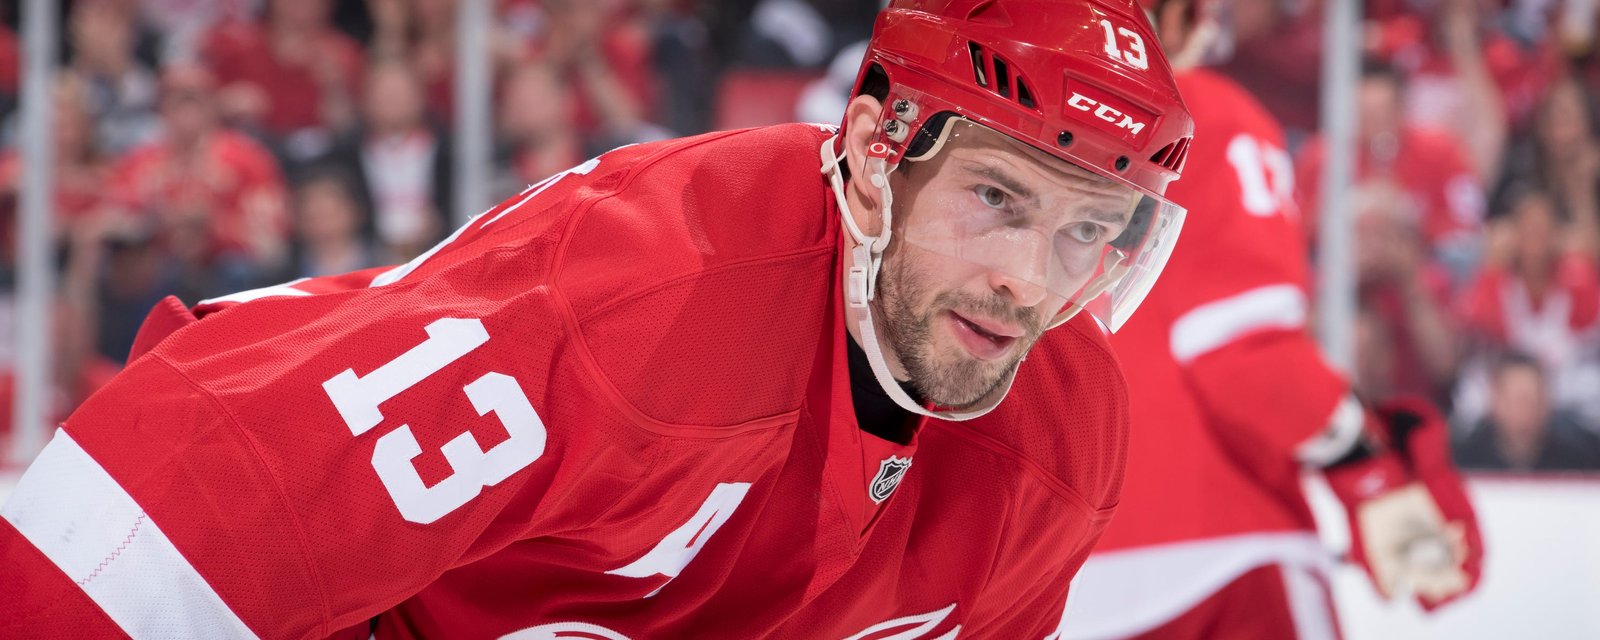 Breaking: Datsyuk just crushed Red Wings fans’ hopes… 